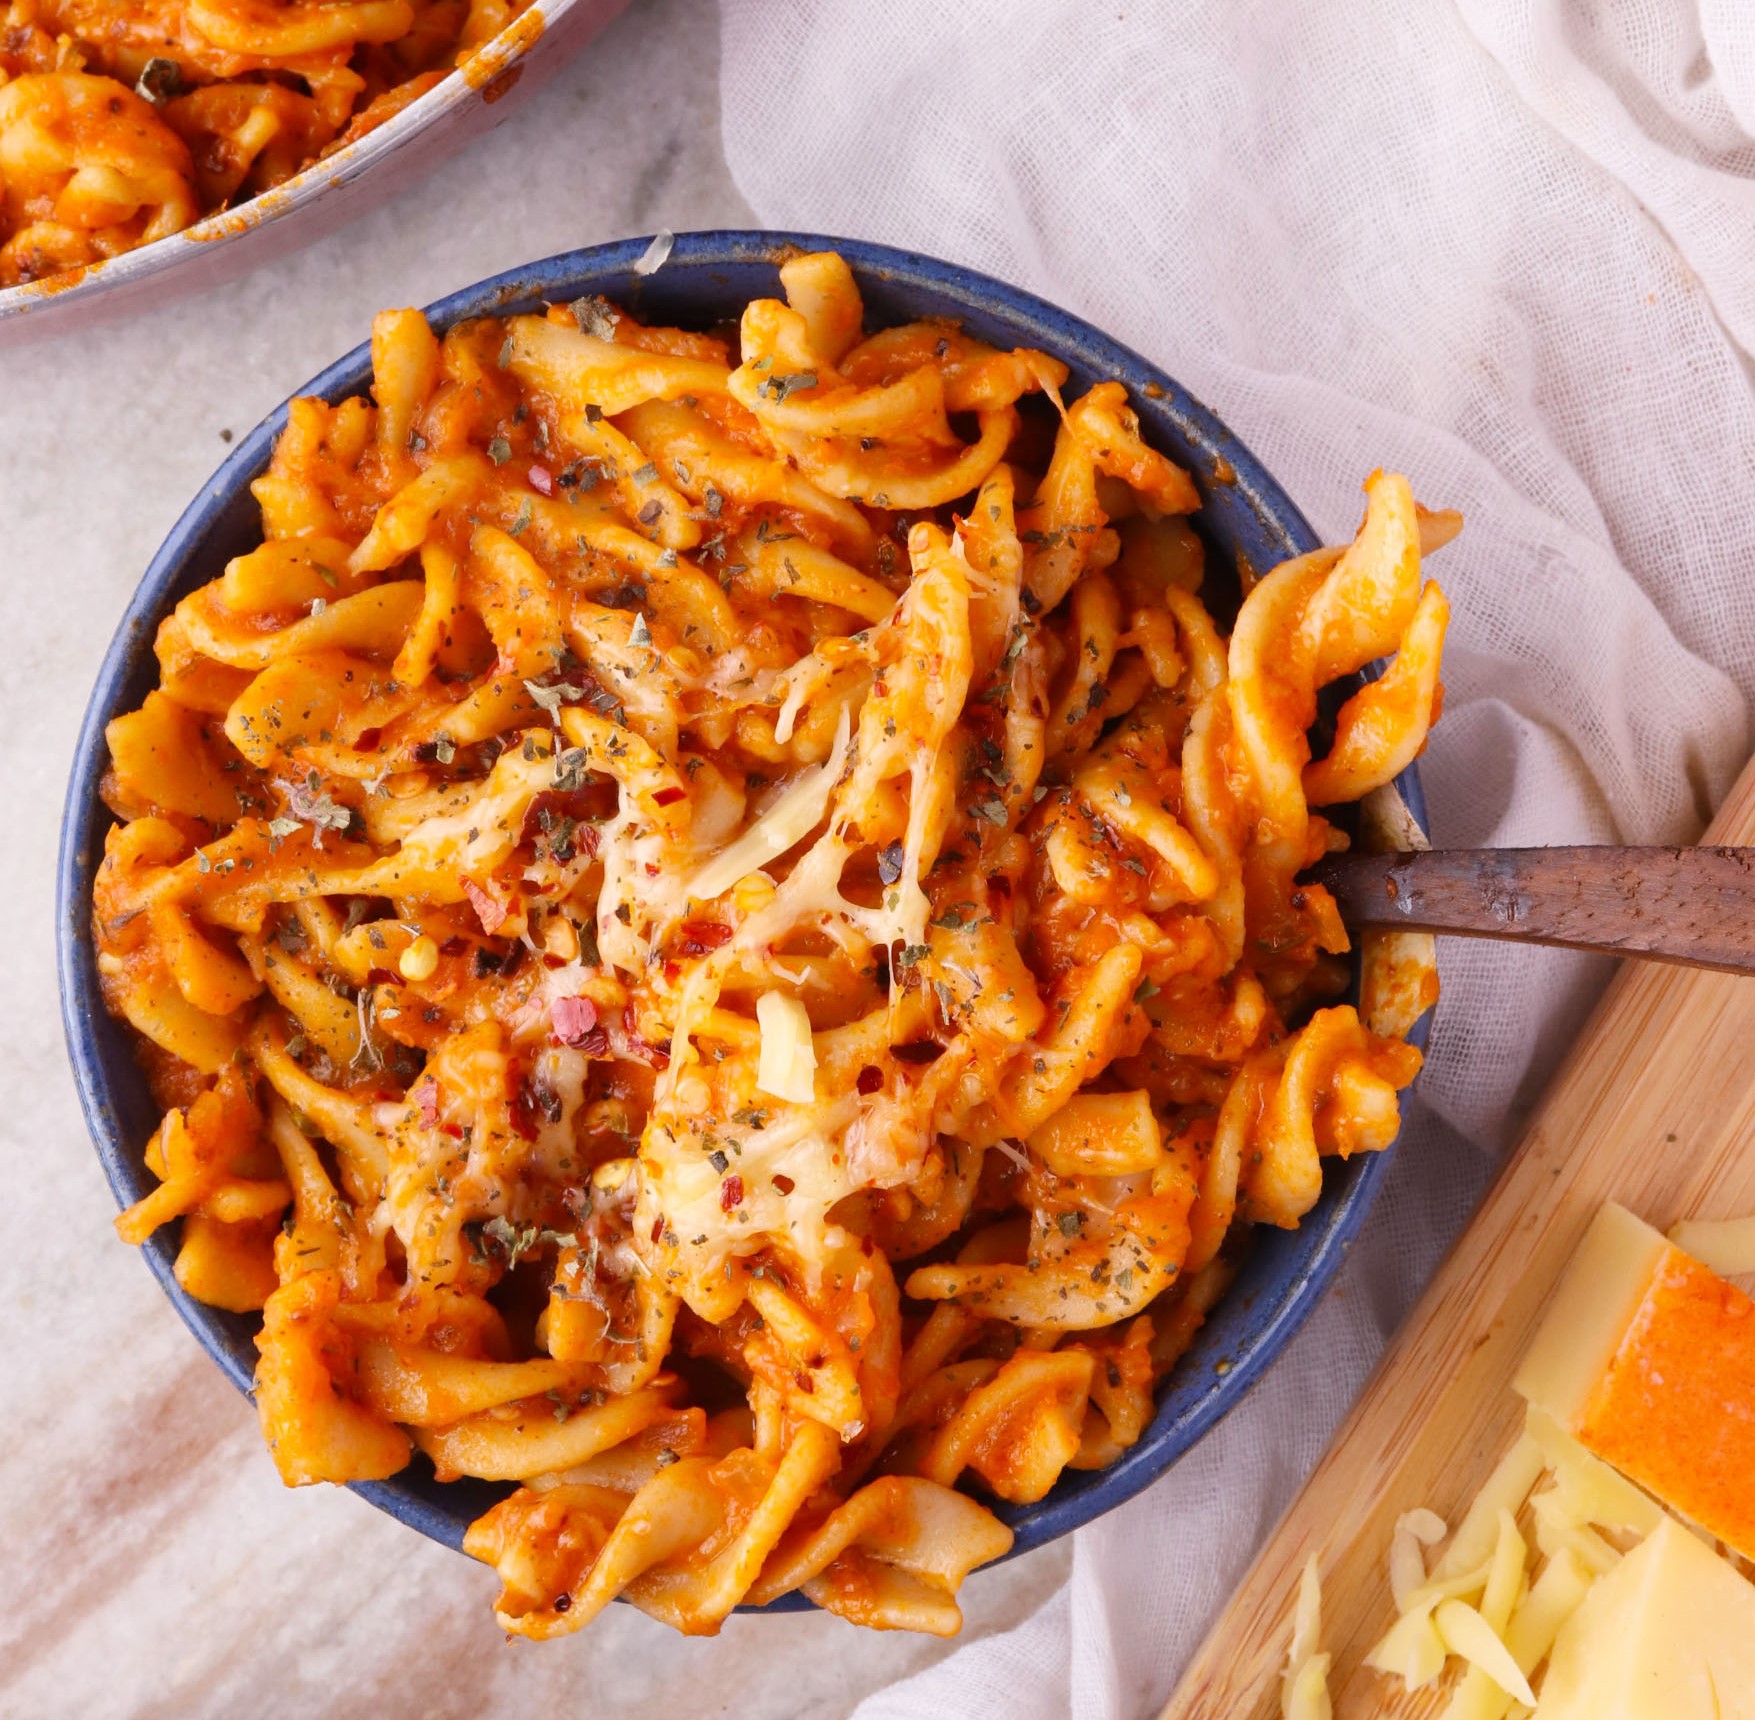 Cheesy Tomato Pasta - That Delicious Dish - Global recipes with an